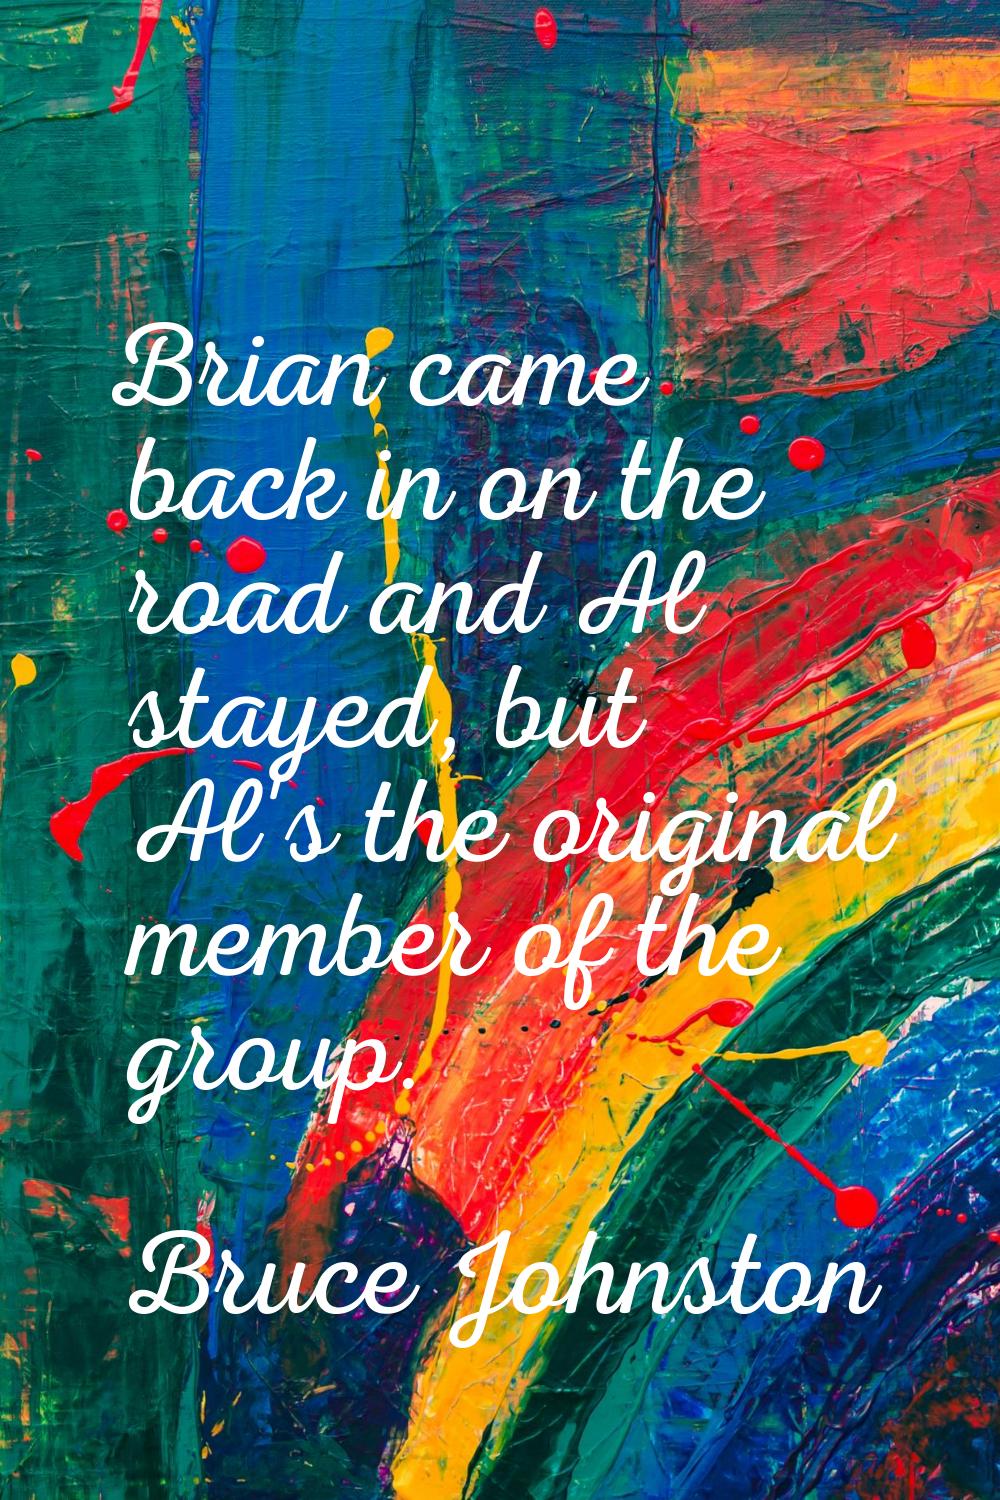 Brian came back in on the road and Al stayed, but Al's the original member of the group.